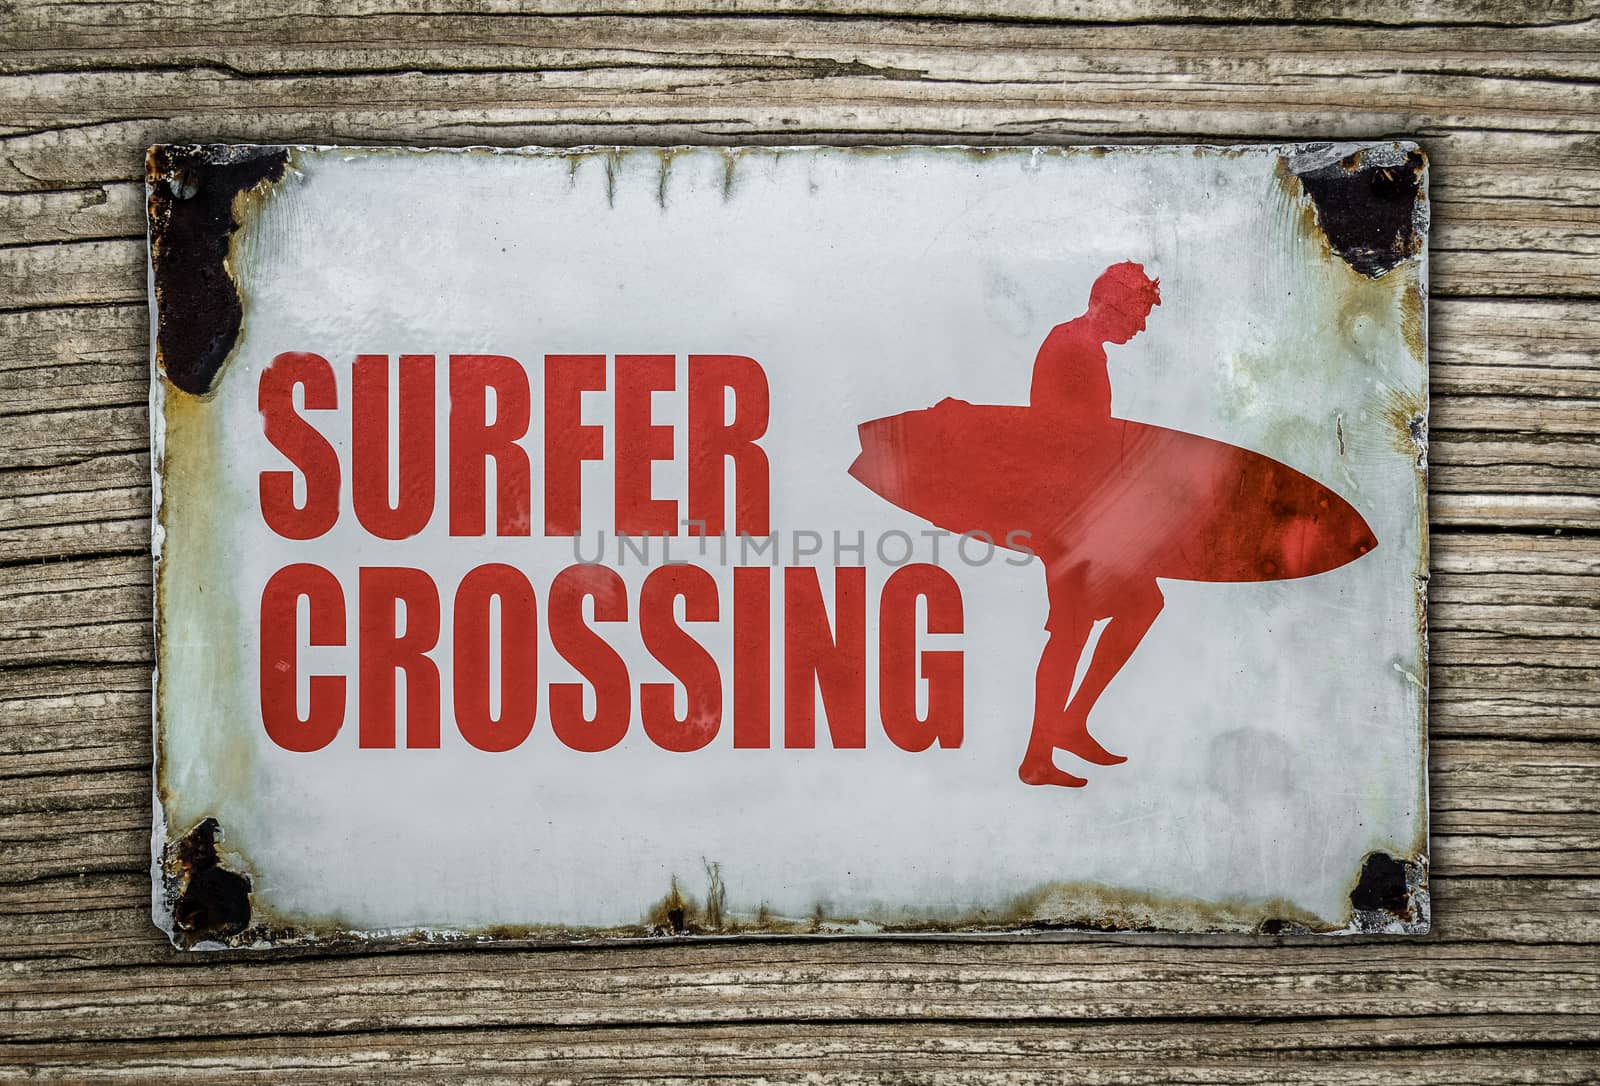 Retro Surfer Crossing Sign On Wooden Background by mrdoomits